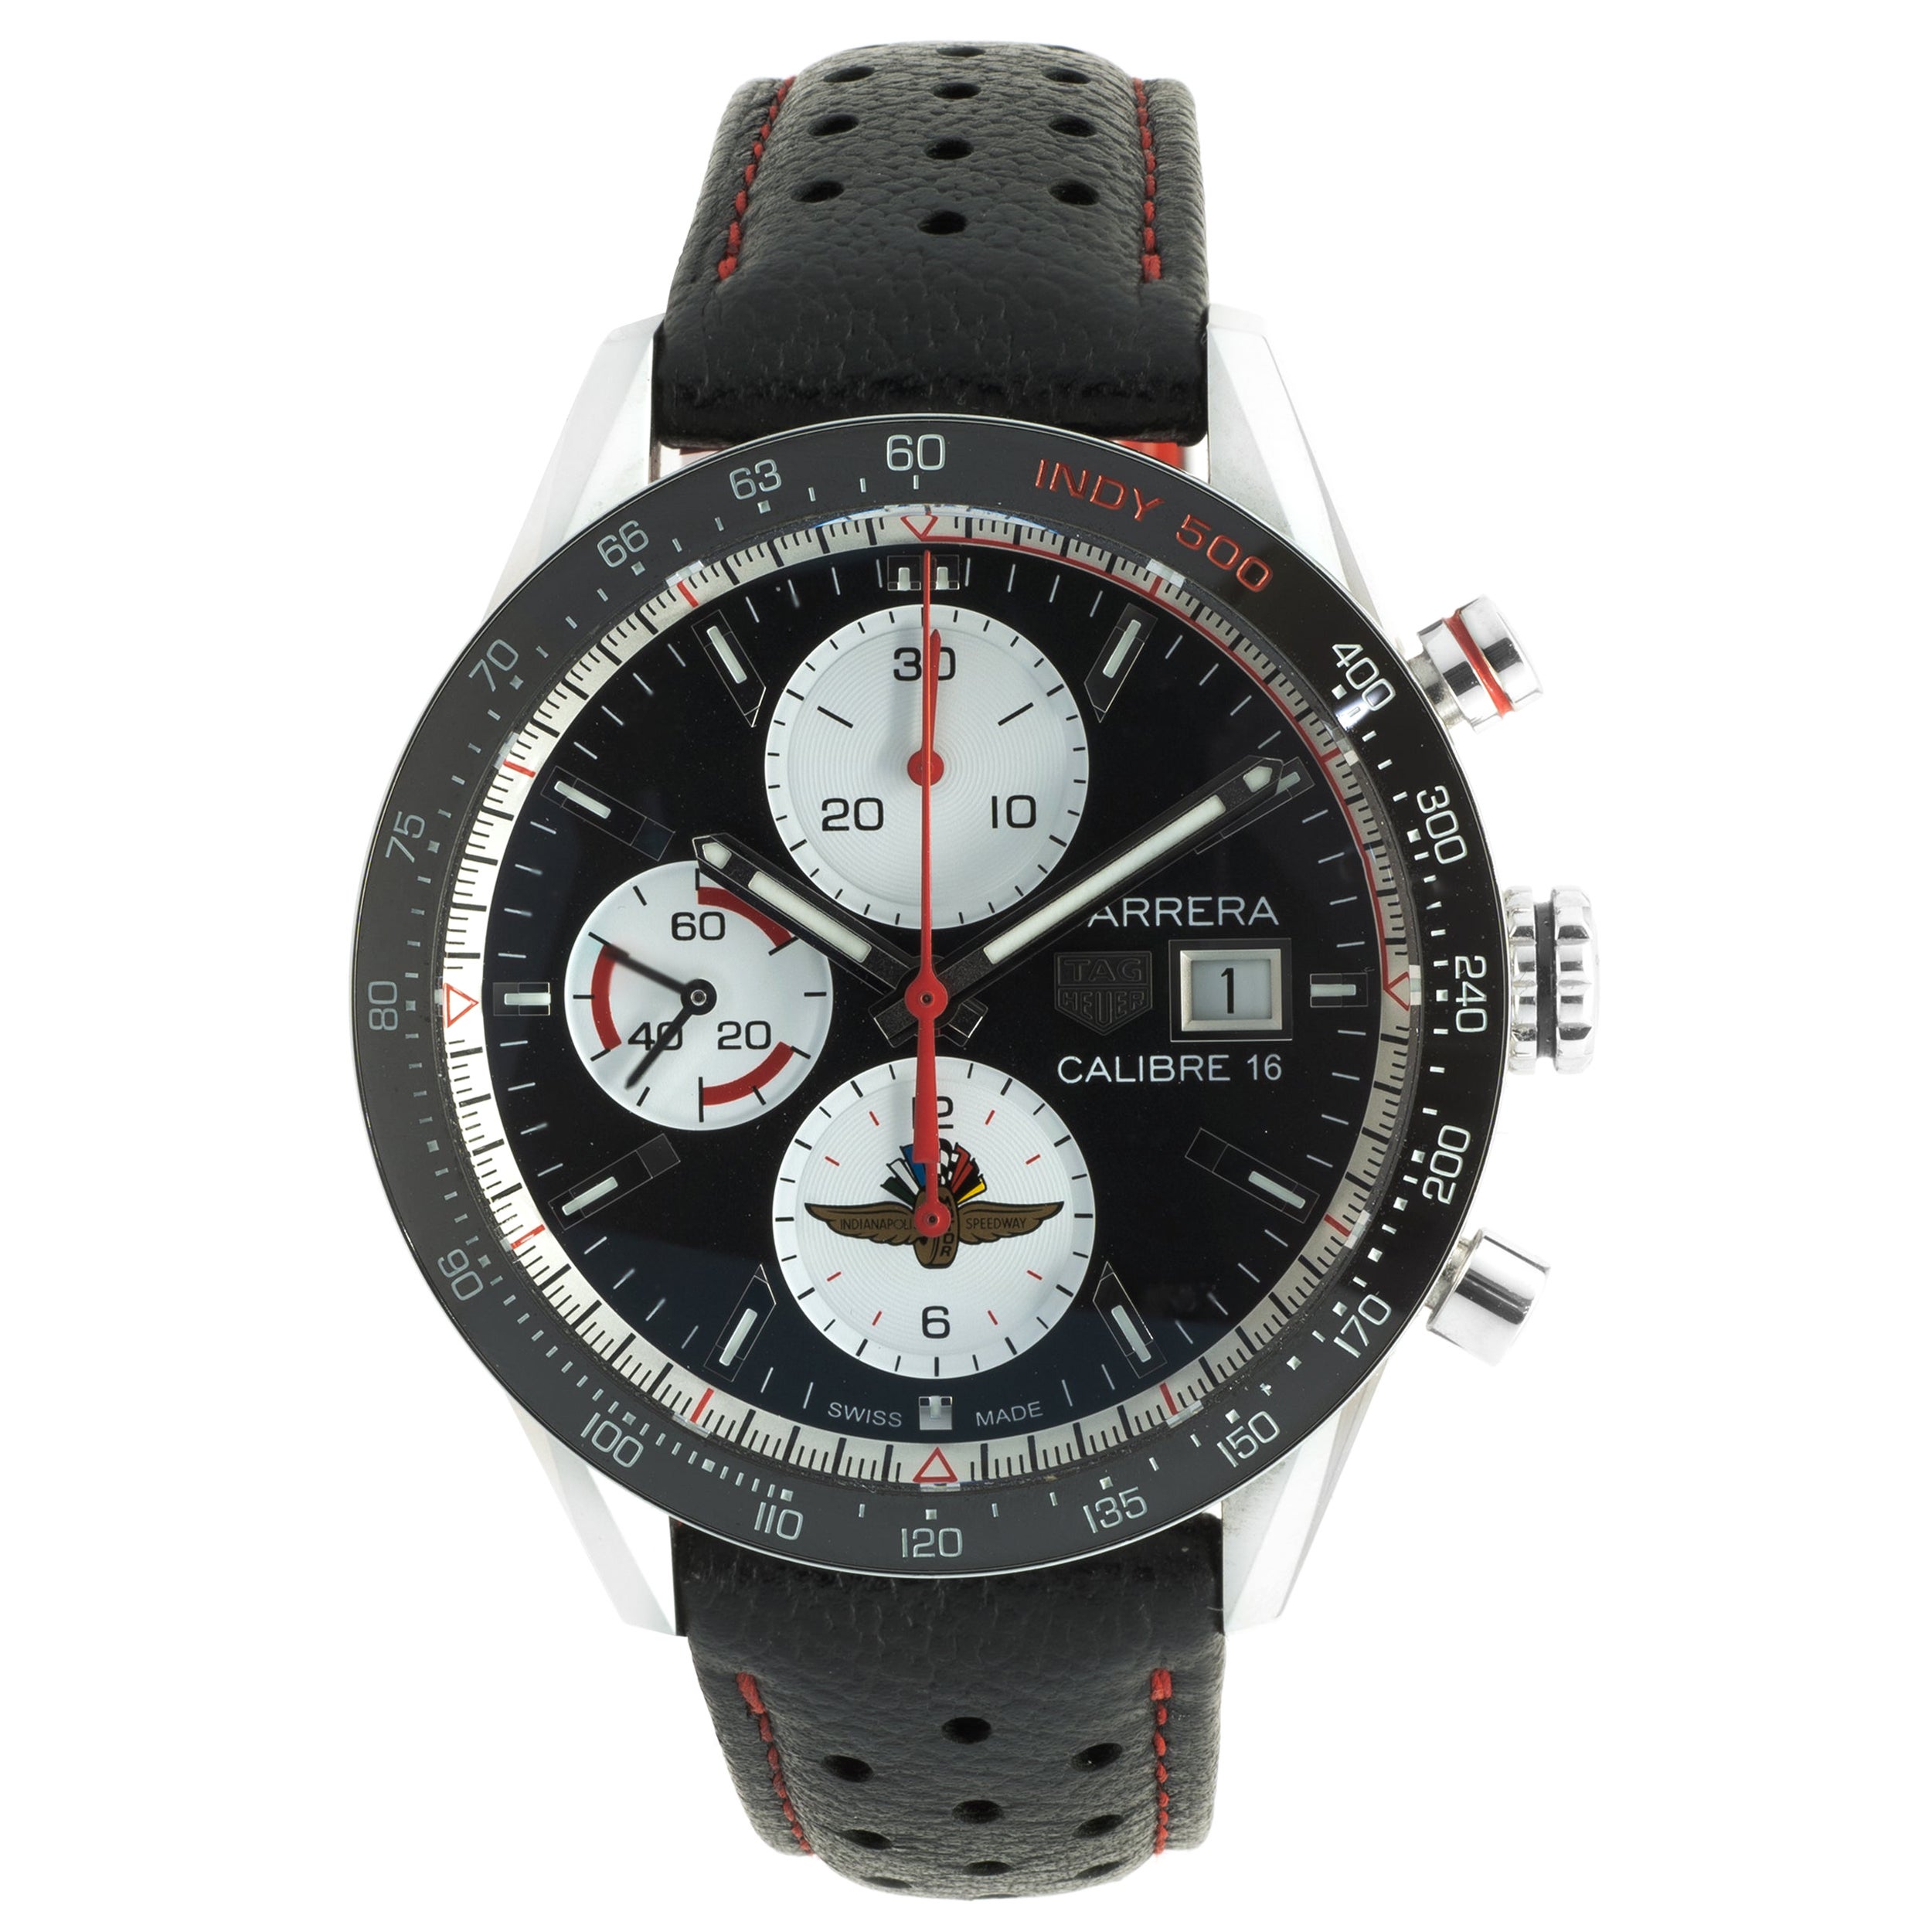 TAG Heuer Stainless Steel Carrera Indy 500